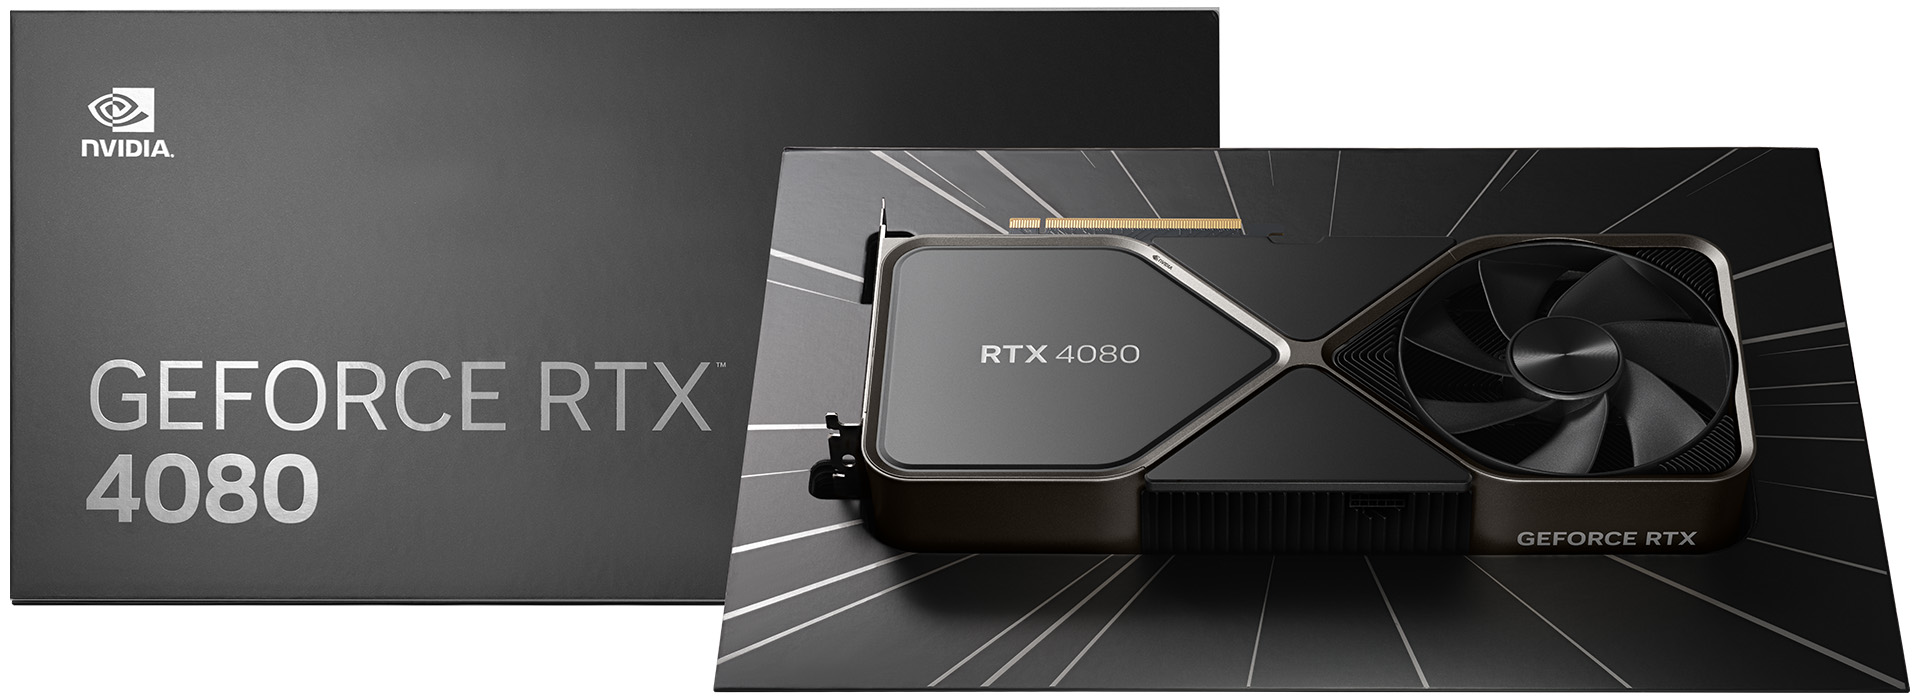 NVIDIA GeForce RTX 4080 (Package View)